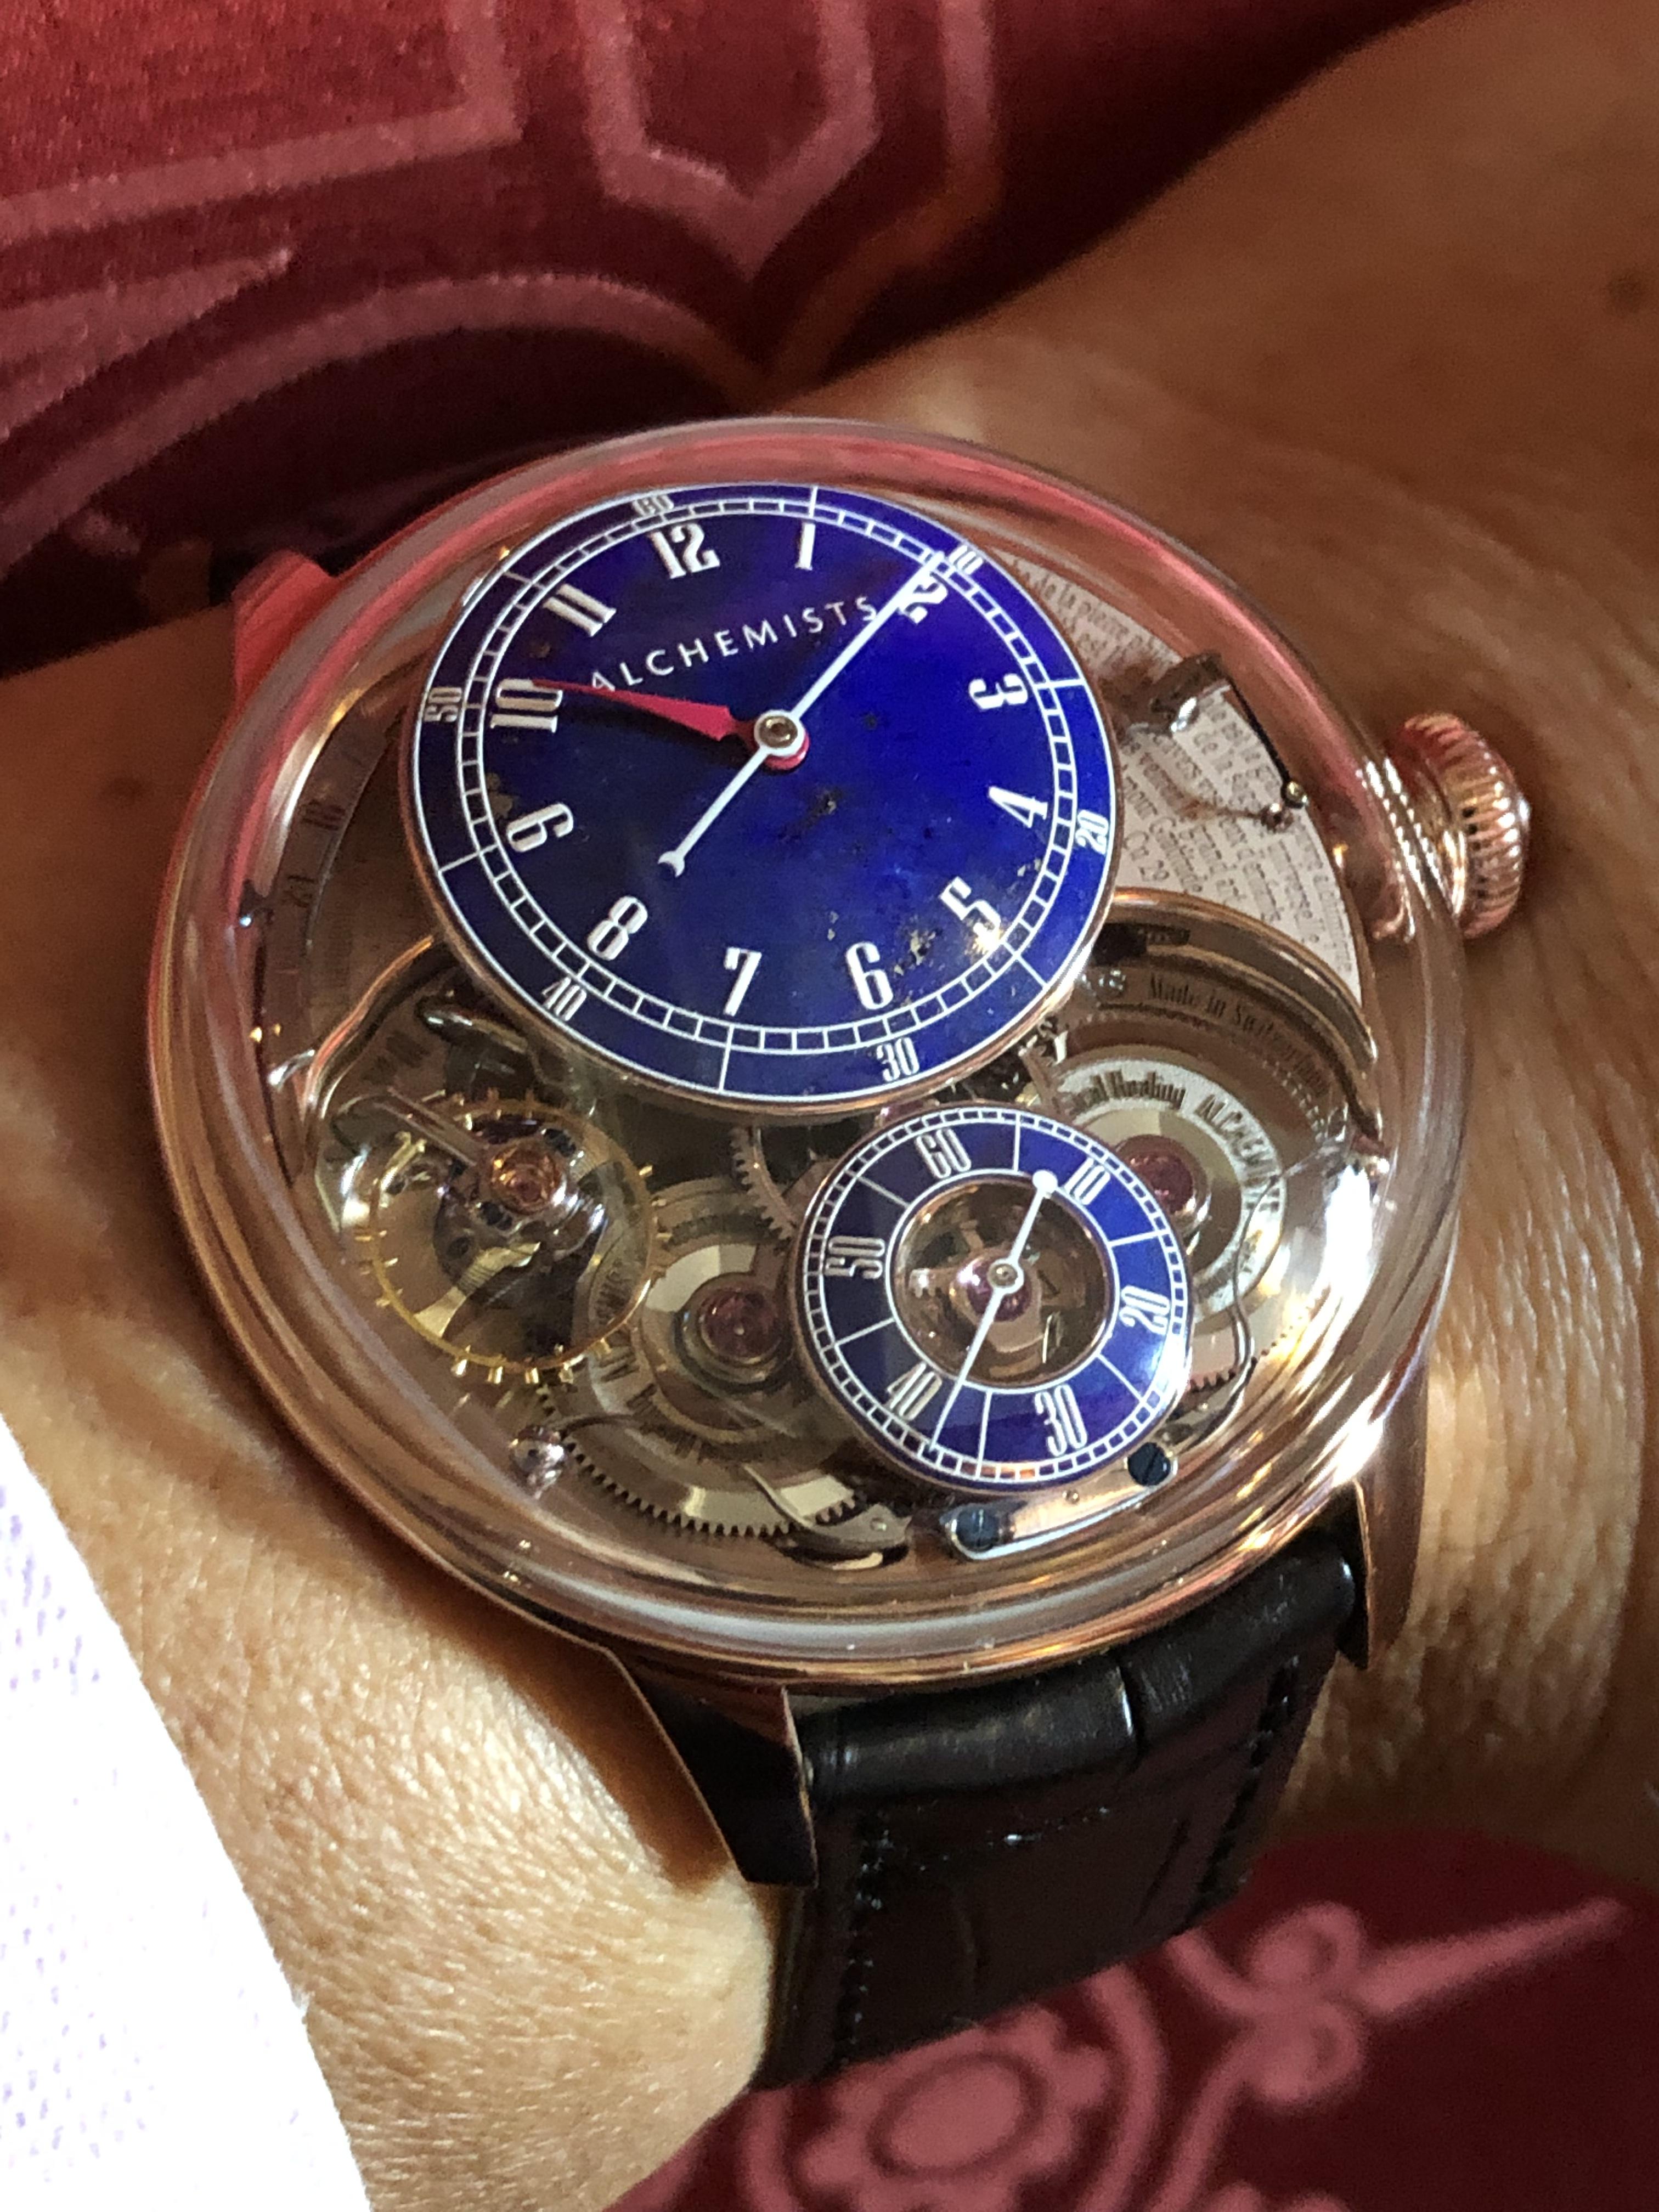 Live from Baselworld 2019: Alchemist -